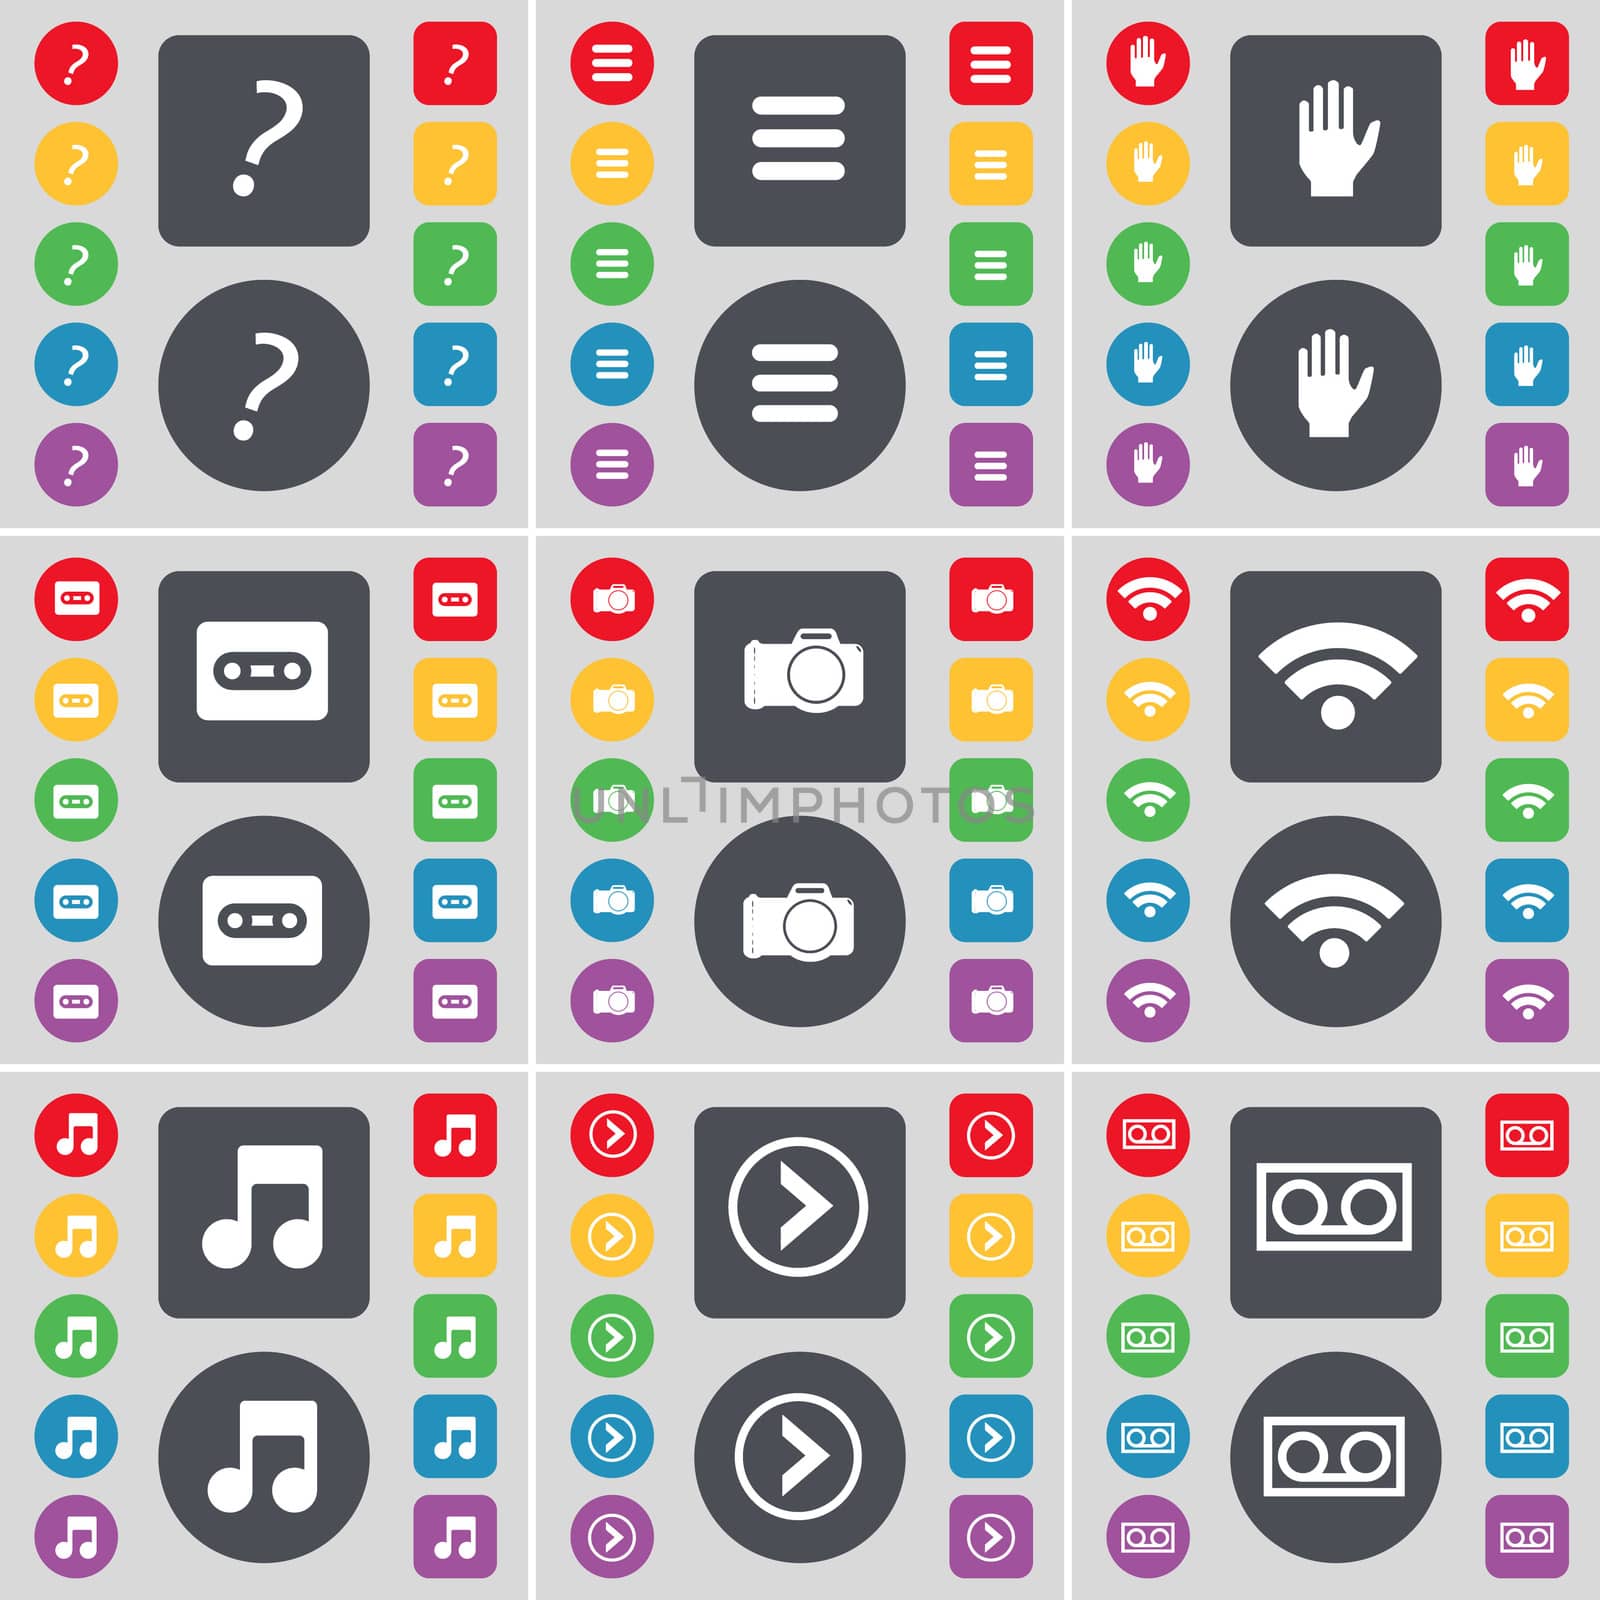 Quotation mark, Apps, Hand, Cassette, Wi-Fi, Note, Arrow right, Cassette icon symbol. A large set of flat, colored buttons for your design. illustration